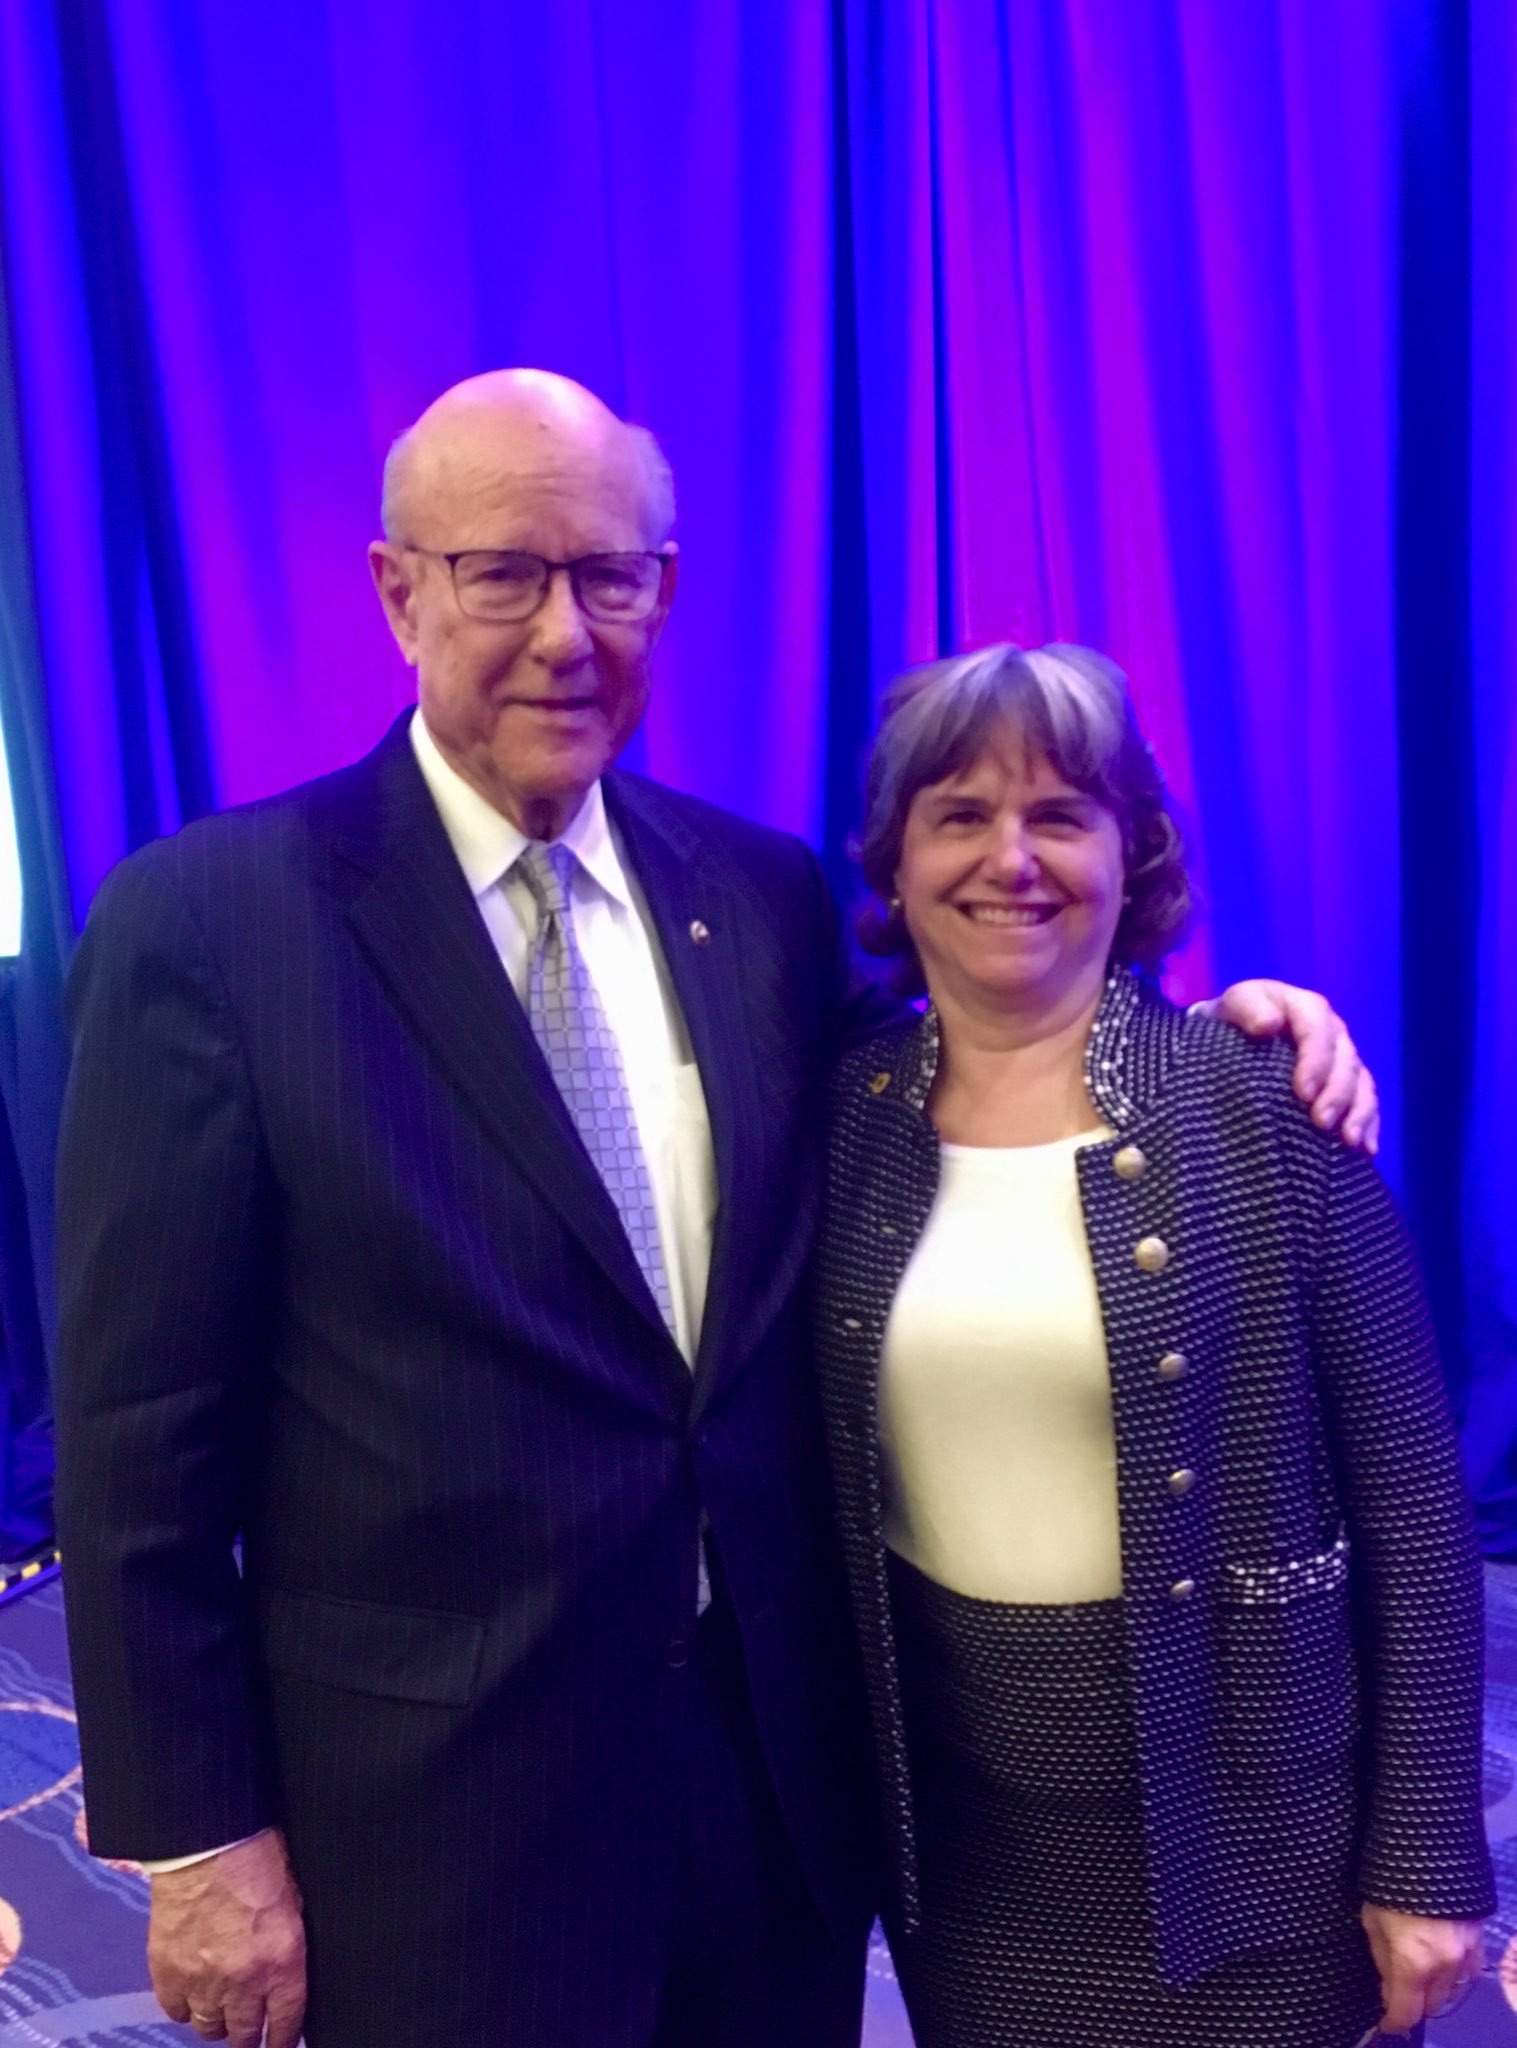  With Senator Pat Roberts as he received the Gene White Award at the Global Child Nutrition Foundation Event 